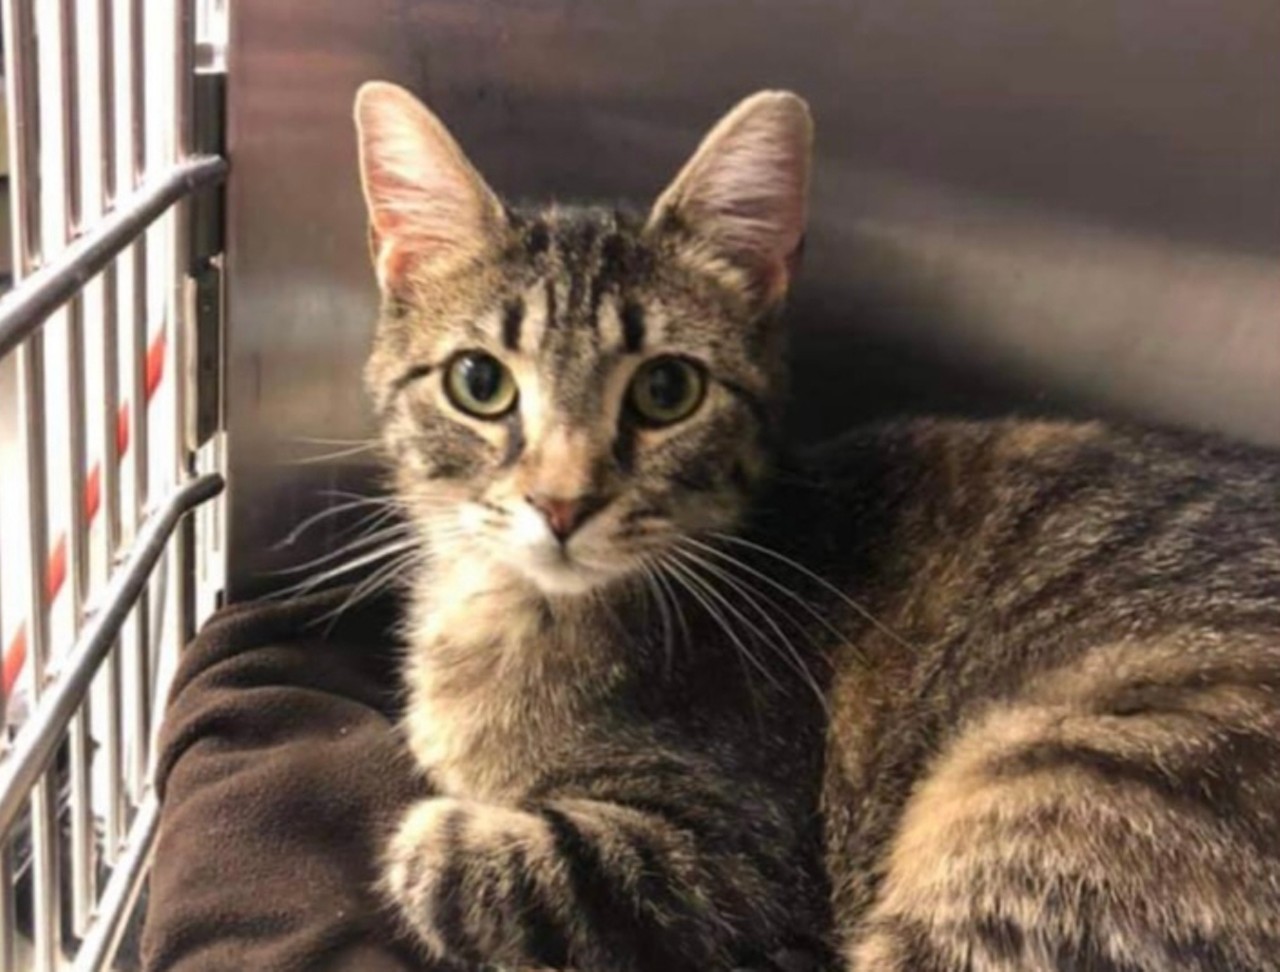 April; Available at Stray Rescue St. Louis
(2320 Pine Street, 314-771-6121)
April is looking for her forever family. She's a one year old domestic shorthair. Her animal ID is SRSL-A-6534.
Photo credit: Stray Rescue St. Louis